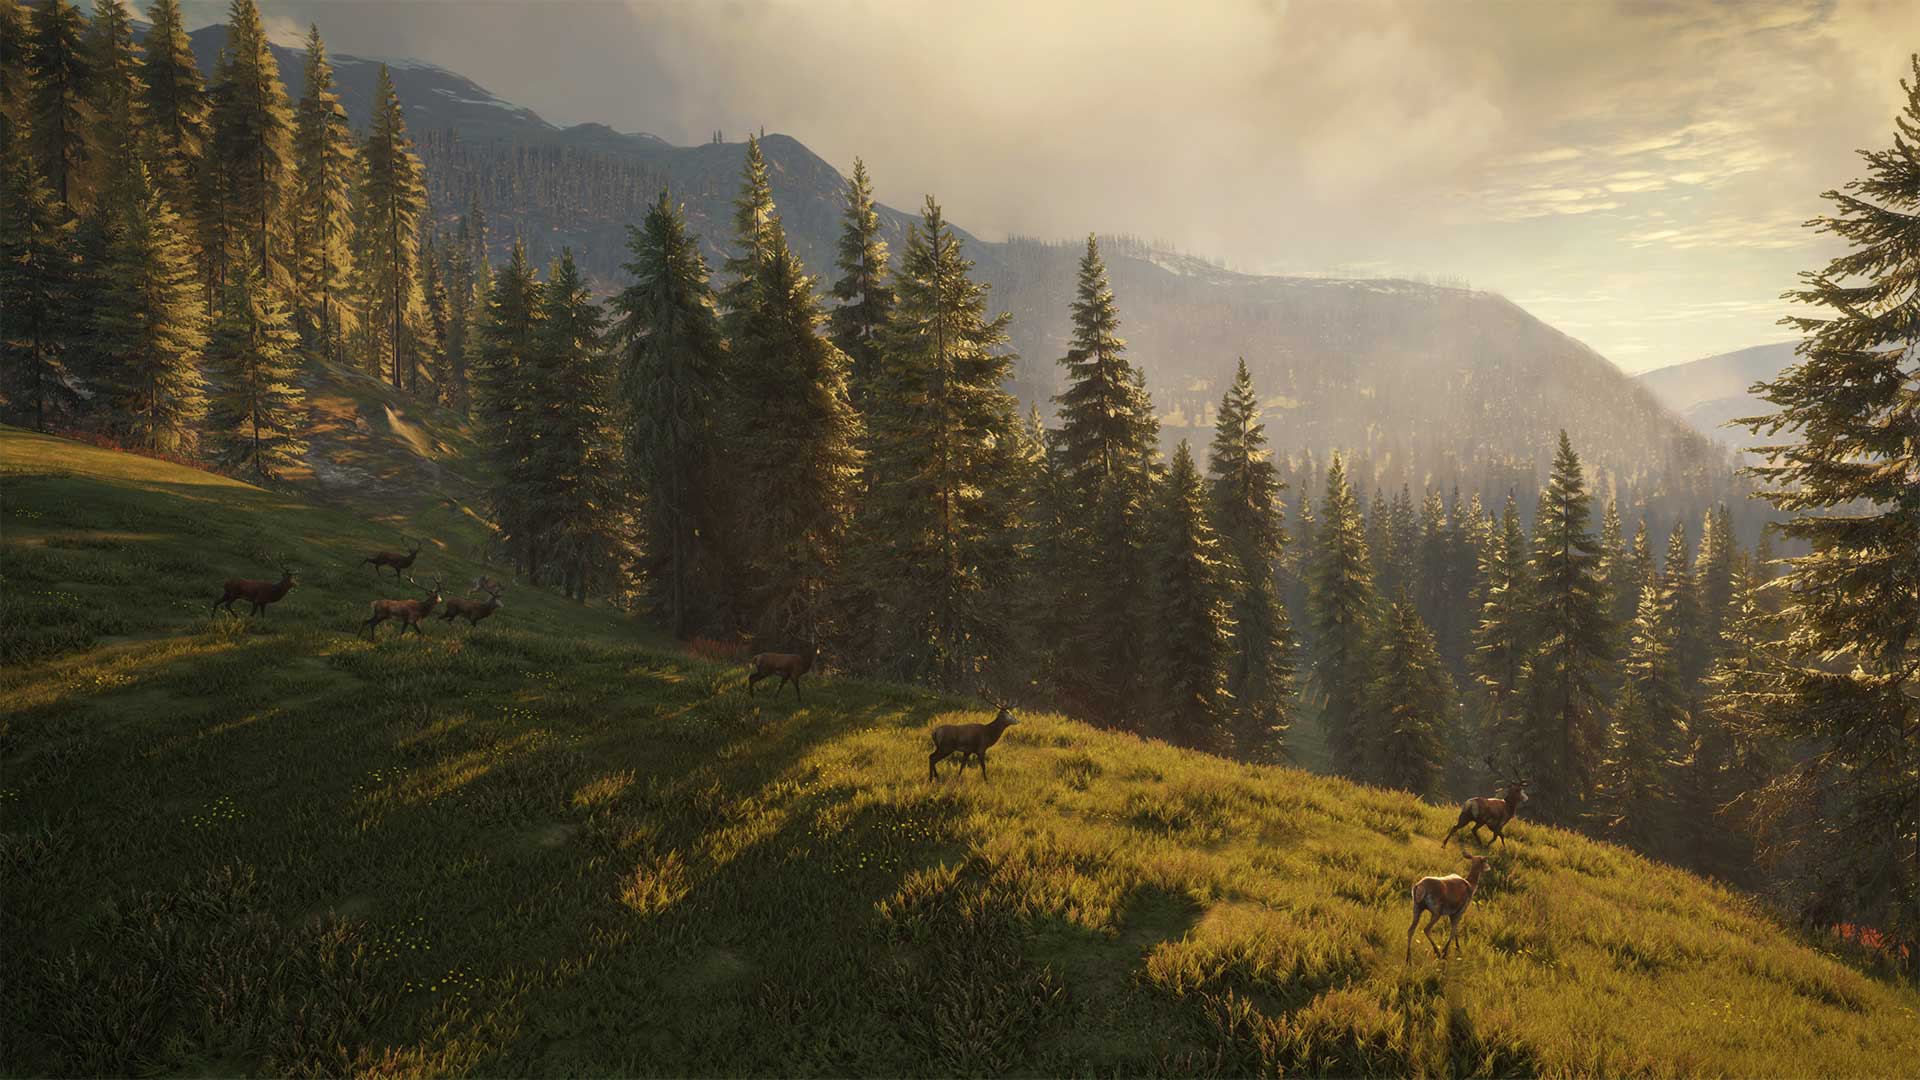 The Hunter Call of The Wild - Review - Game Simulations